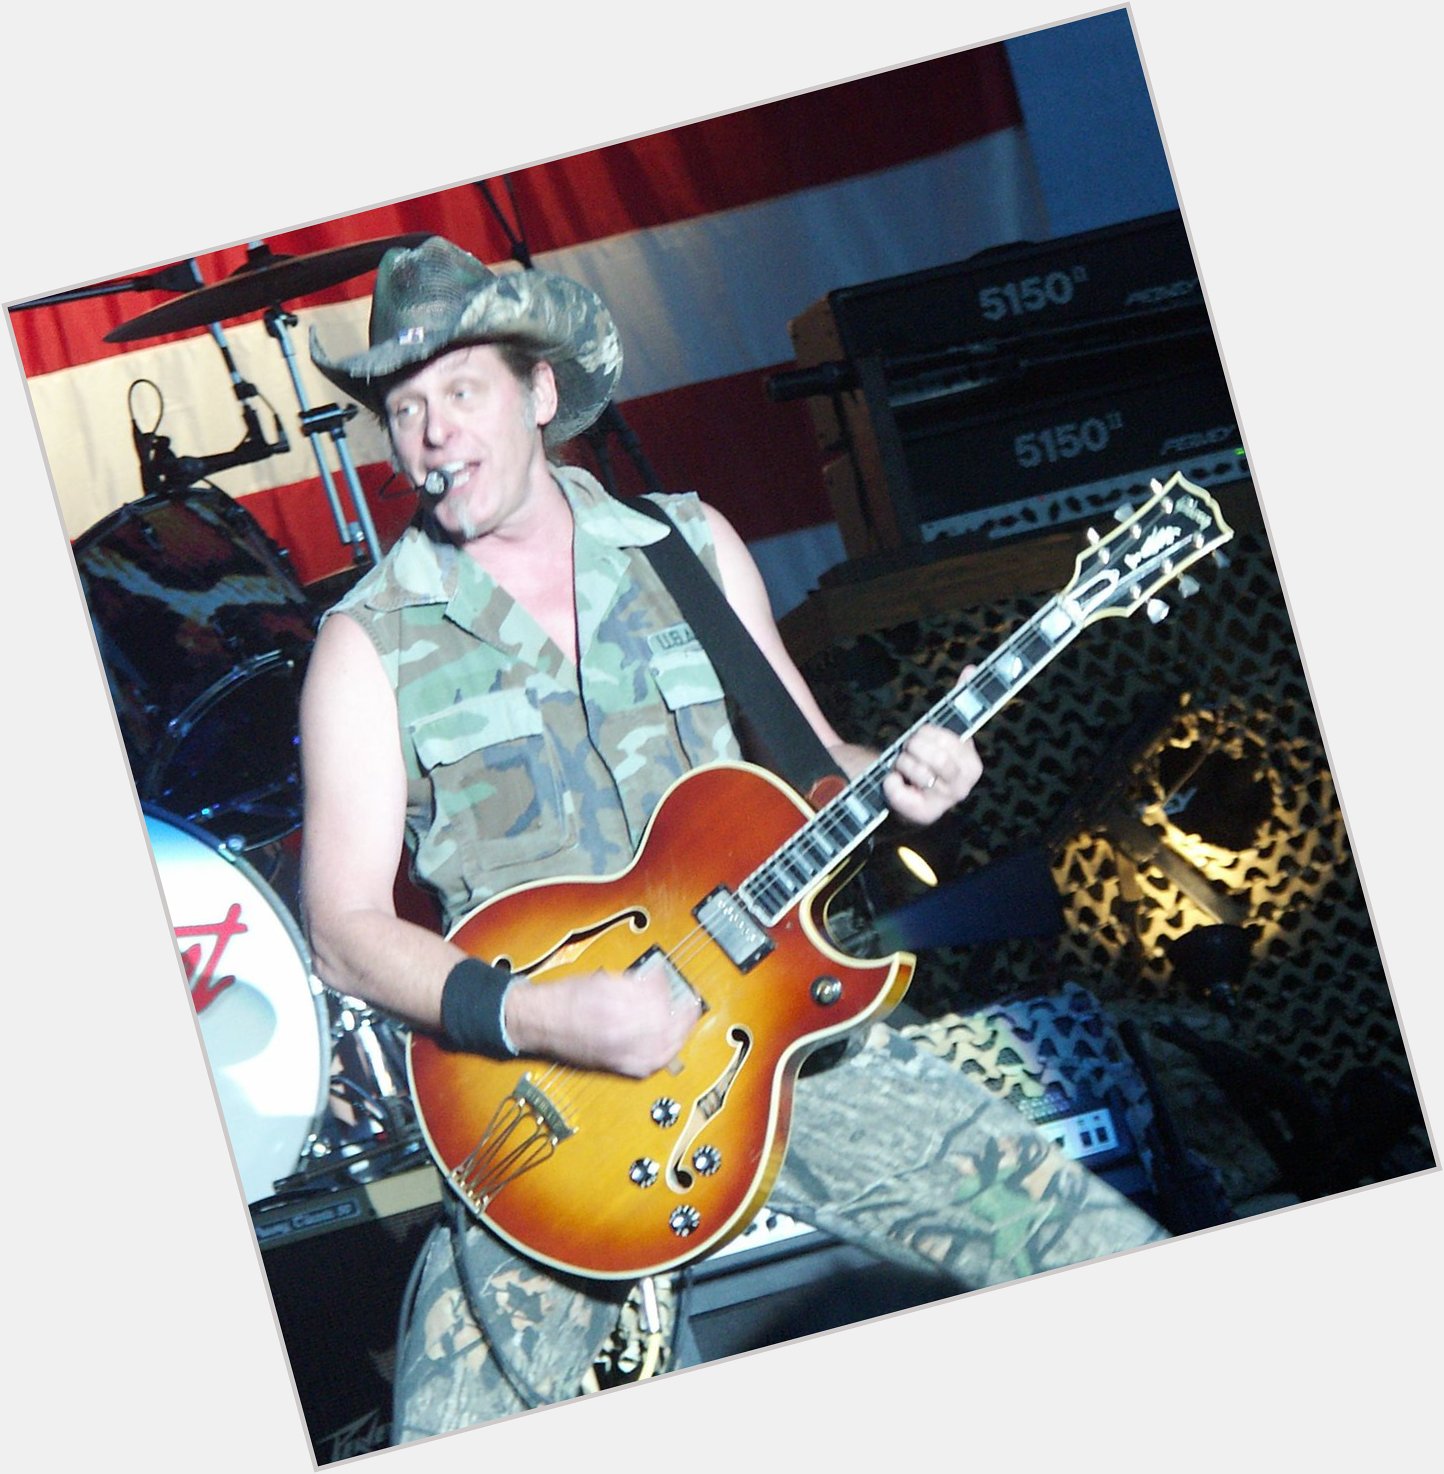 Happy Birthday to American guitarist and rock legend Ted Nugent, 67 today. Known for using Gibson Byrdland guitars. 